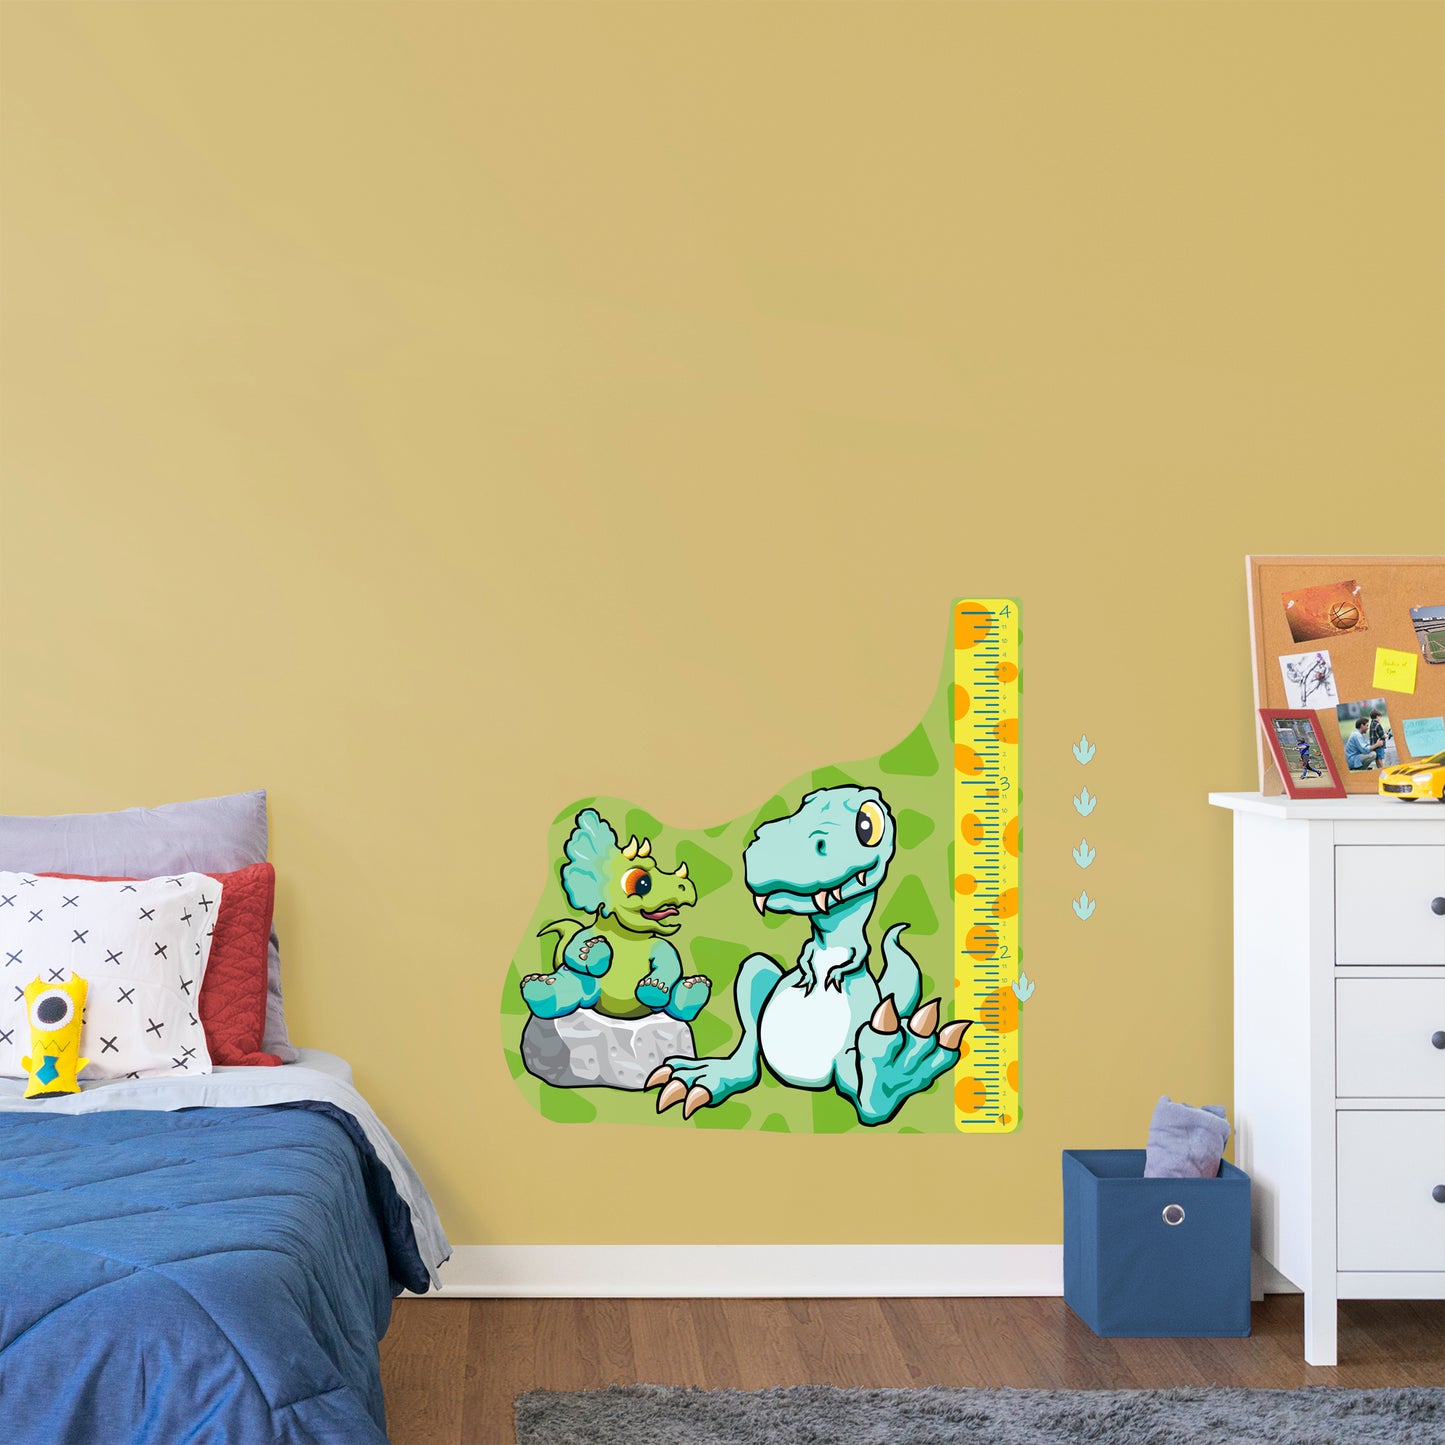 Growth Charts Dinosaurs 03  - Removable Wall Decal